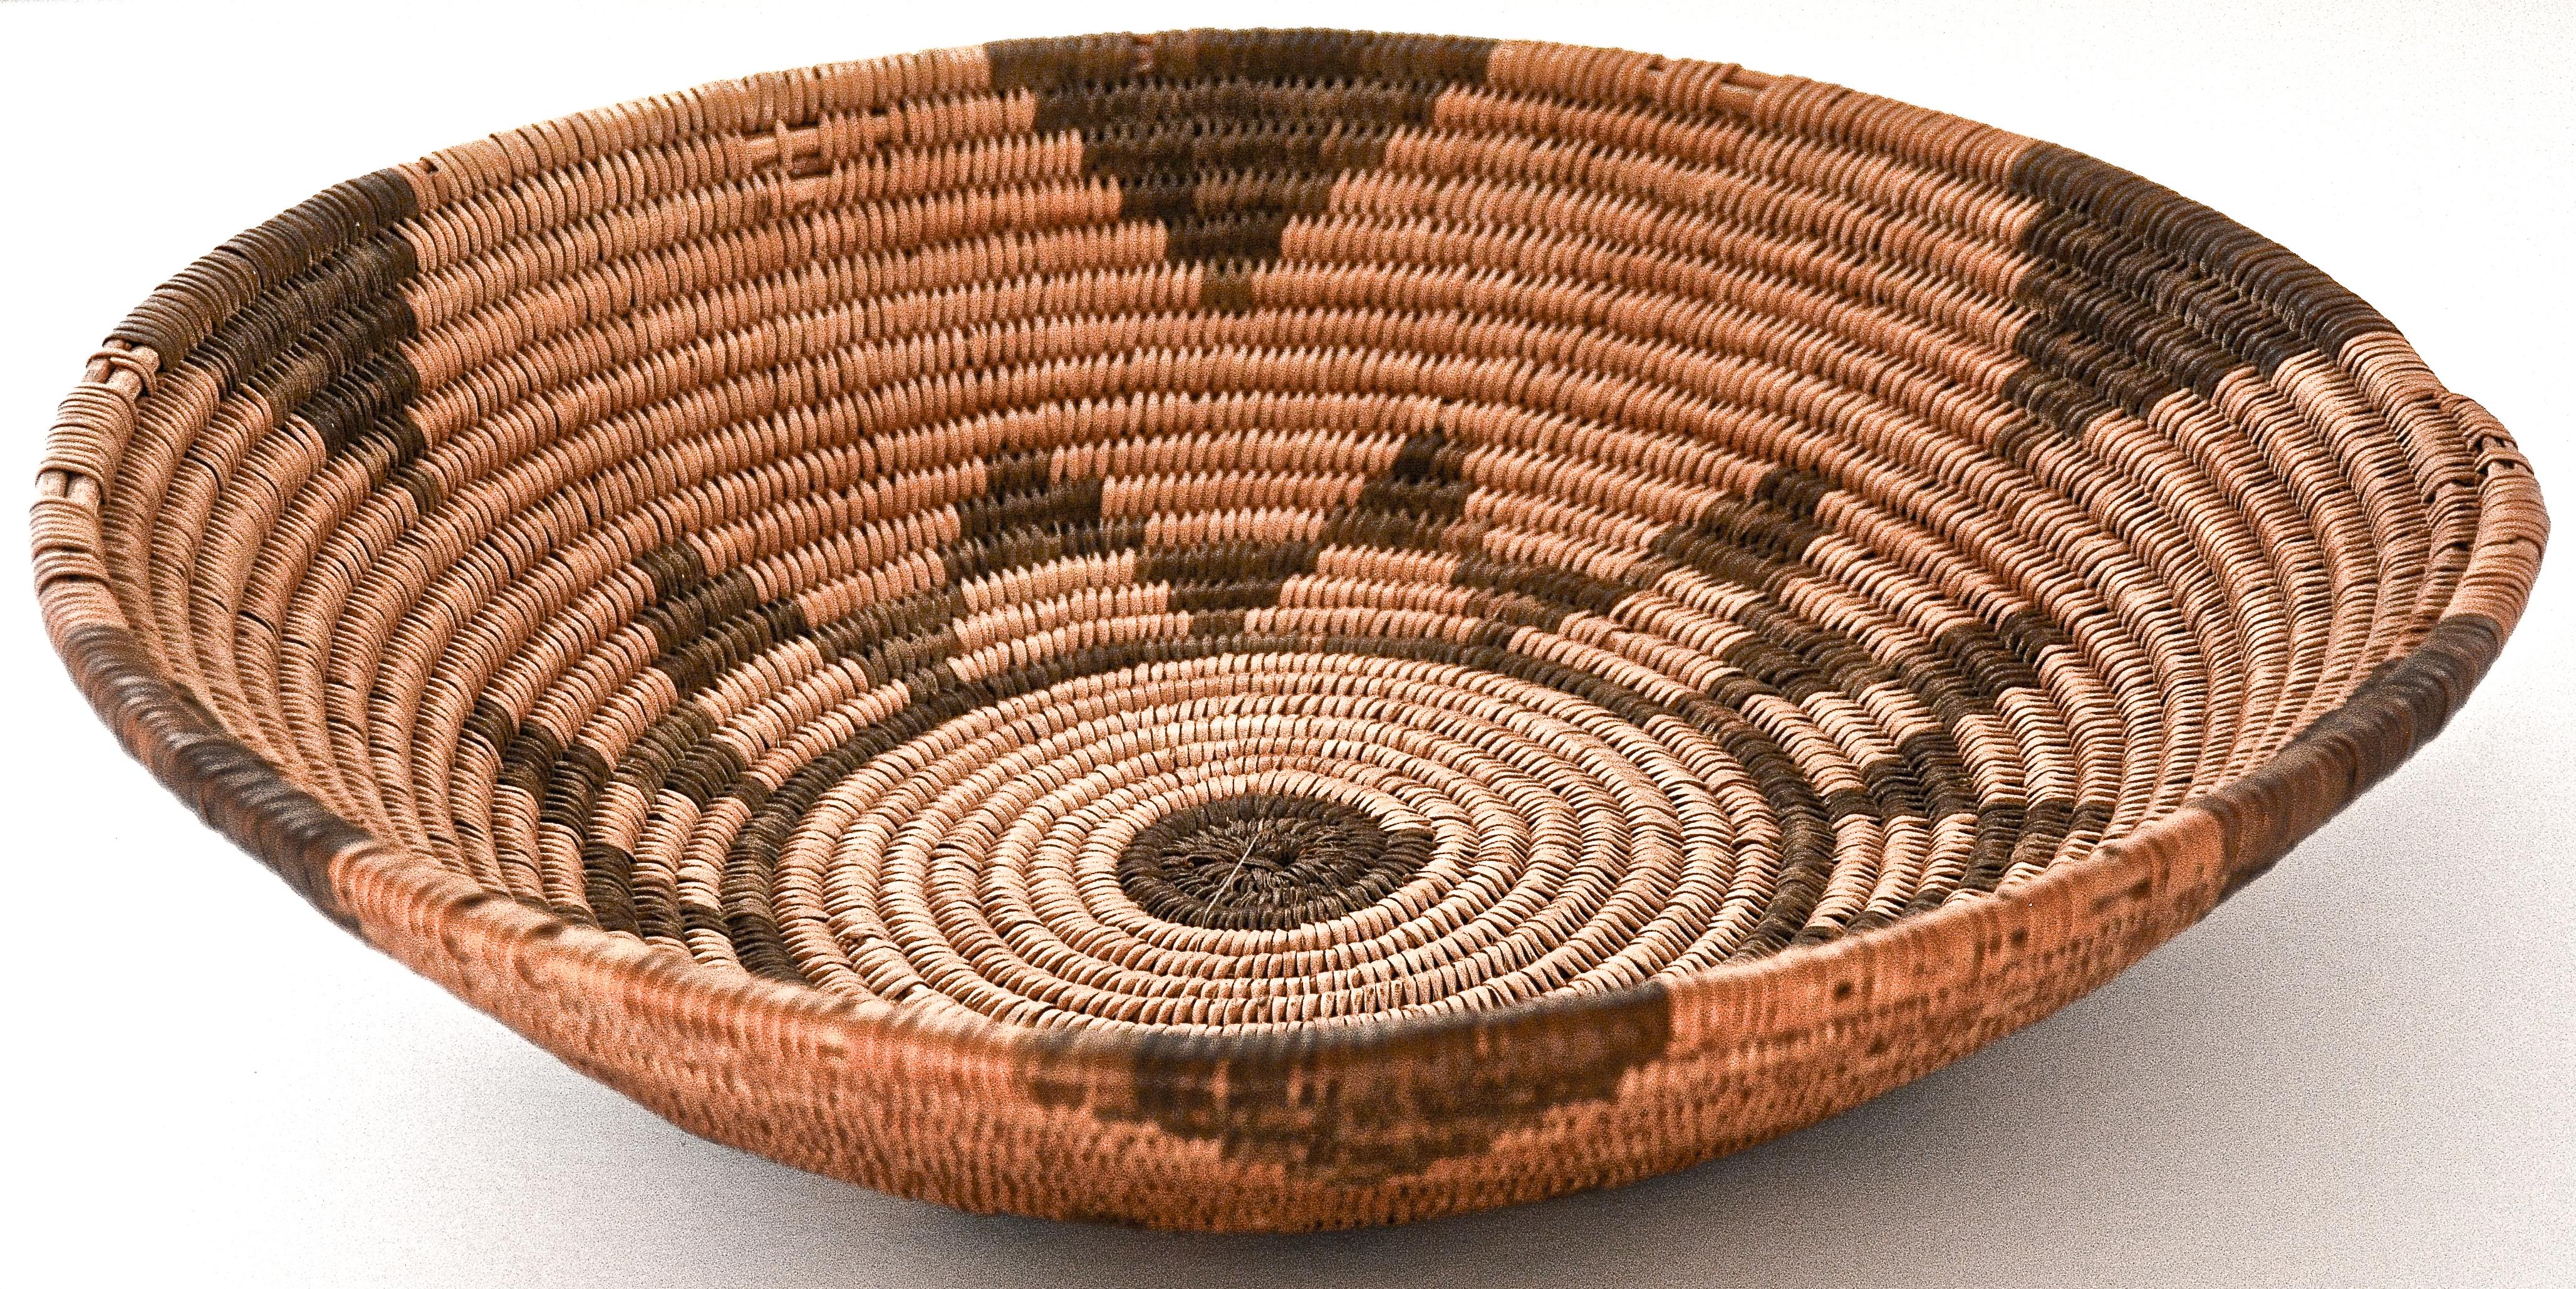 Apache basketry tray with 12 point star design
1900
Willow and Devil's claw
Measures: 2.50 inches Height. x 10 inches in Diameter

 An excellent example of a coiled Apache basketry tray dating from 1900.

The basket appears in very good